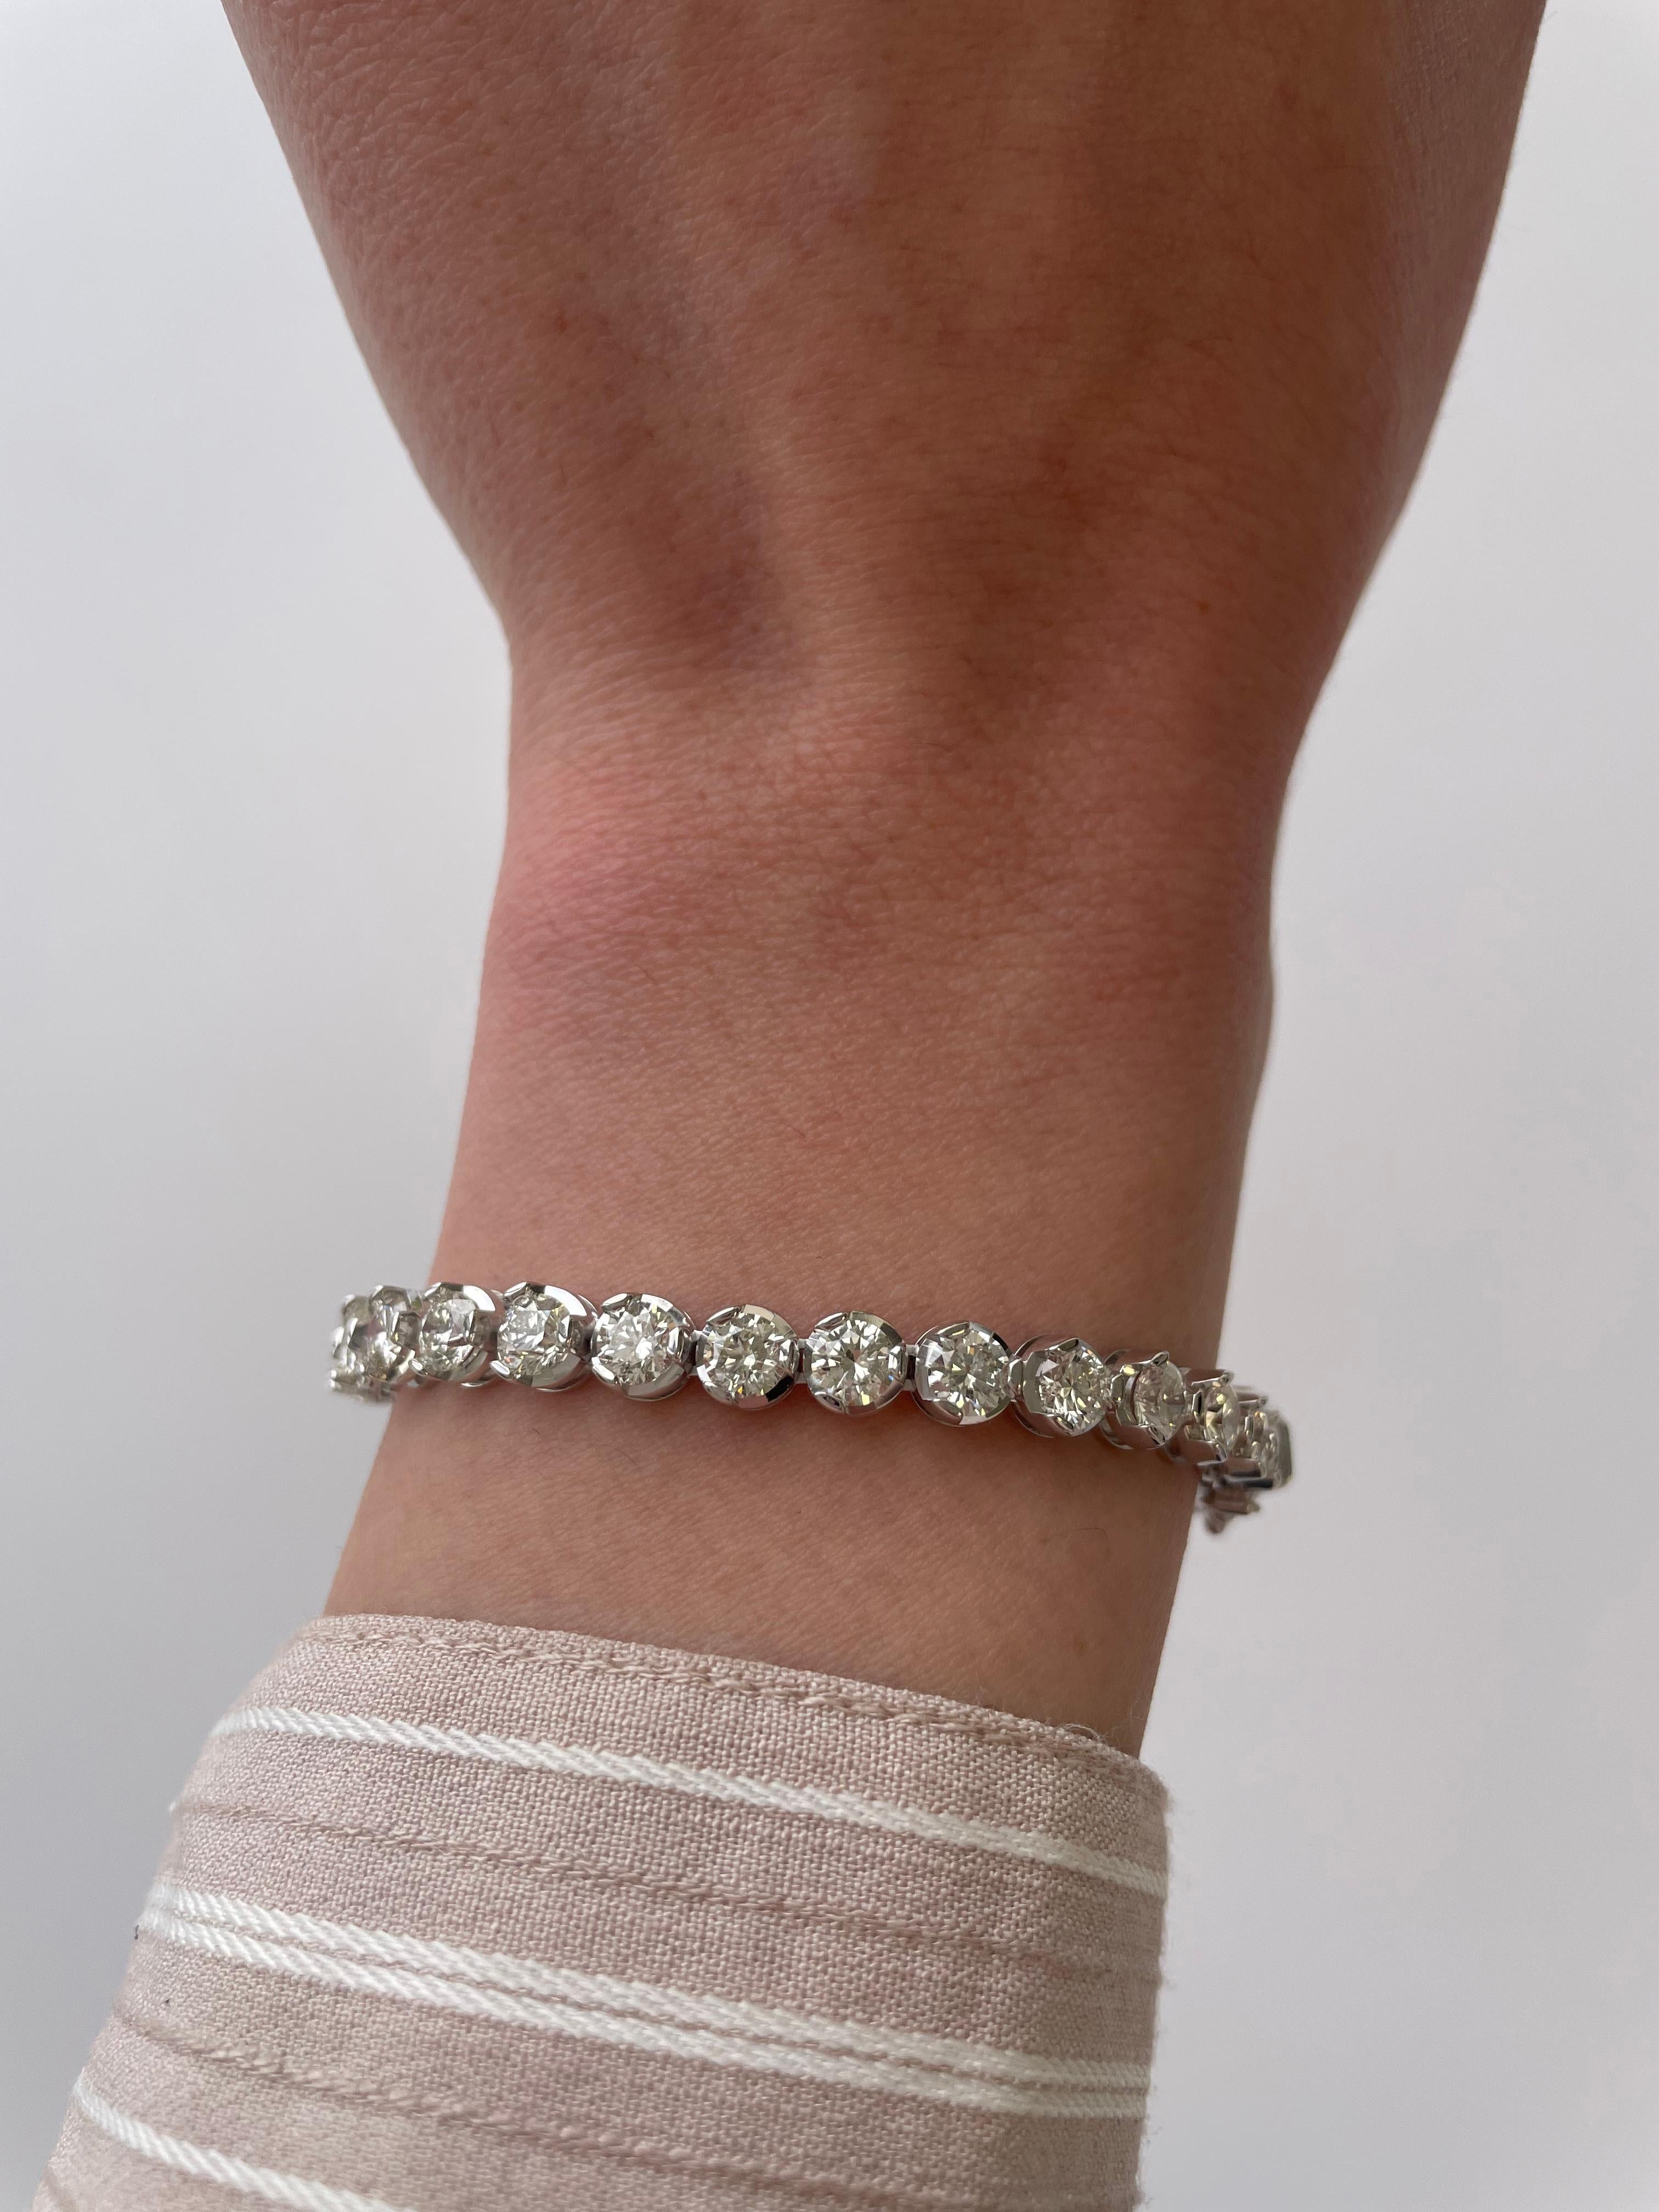 Exquisite and timeless diamonds tennis bracelet, by Alexander Beverly Hills.
33 round brilliant diamonds, 10.51 carats total. Approximately G-I color and VS2/SI1 clarity. Four prong set in 18k white gold, 17.03 grams, 7.25 inches. 
Accommodated with